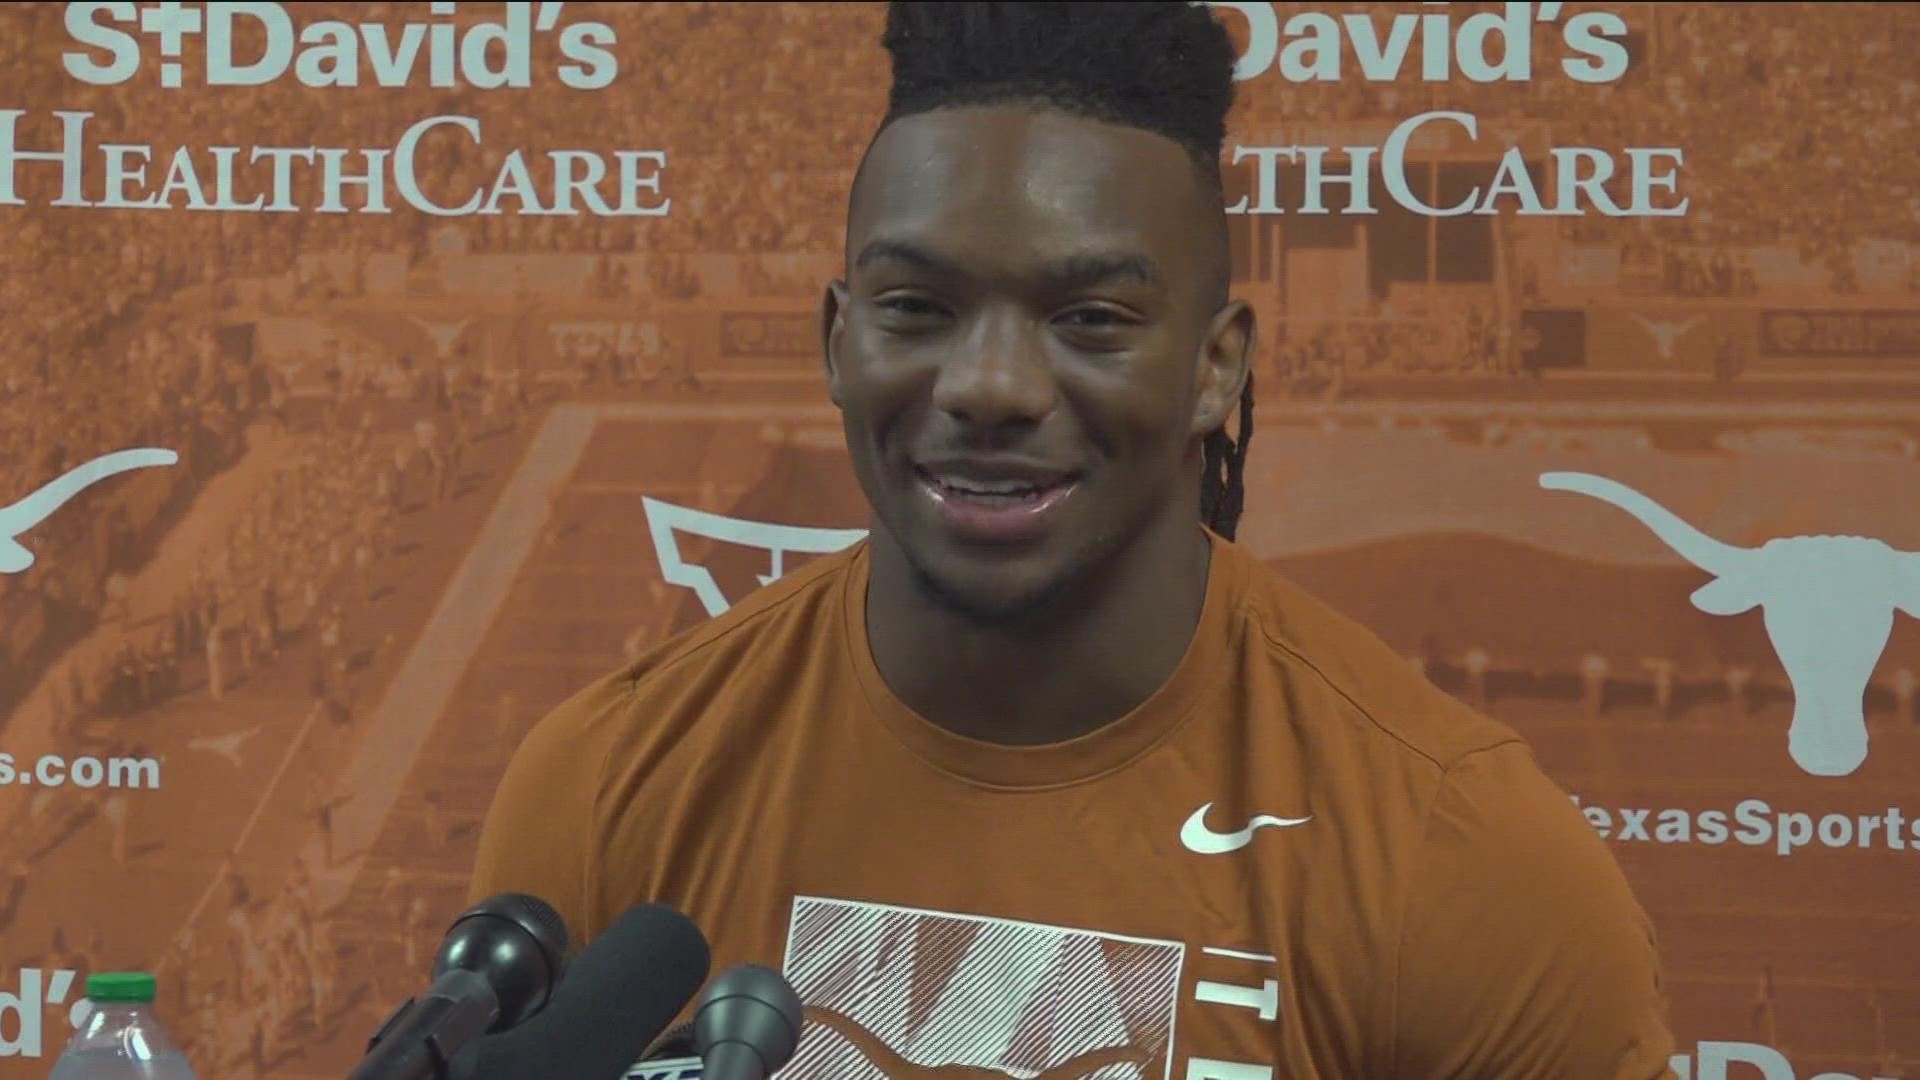 The Texas running back says he does it to get the team's energy up.